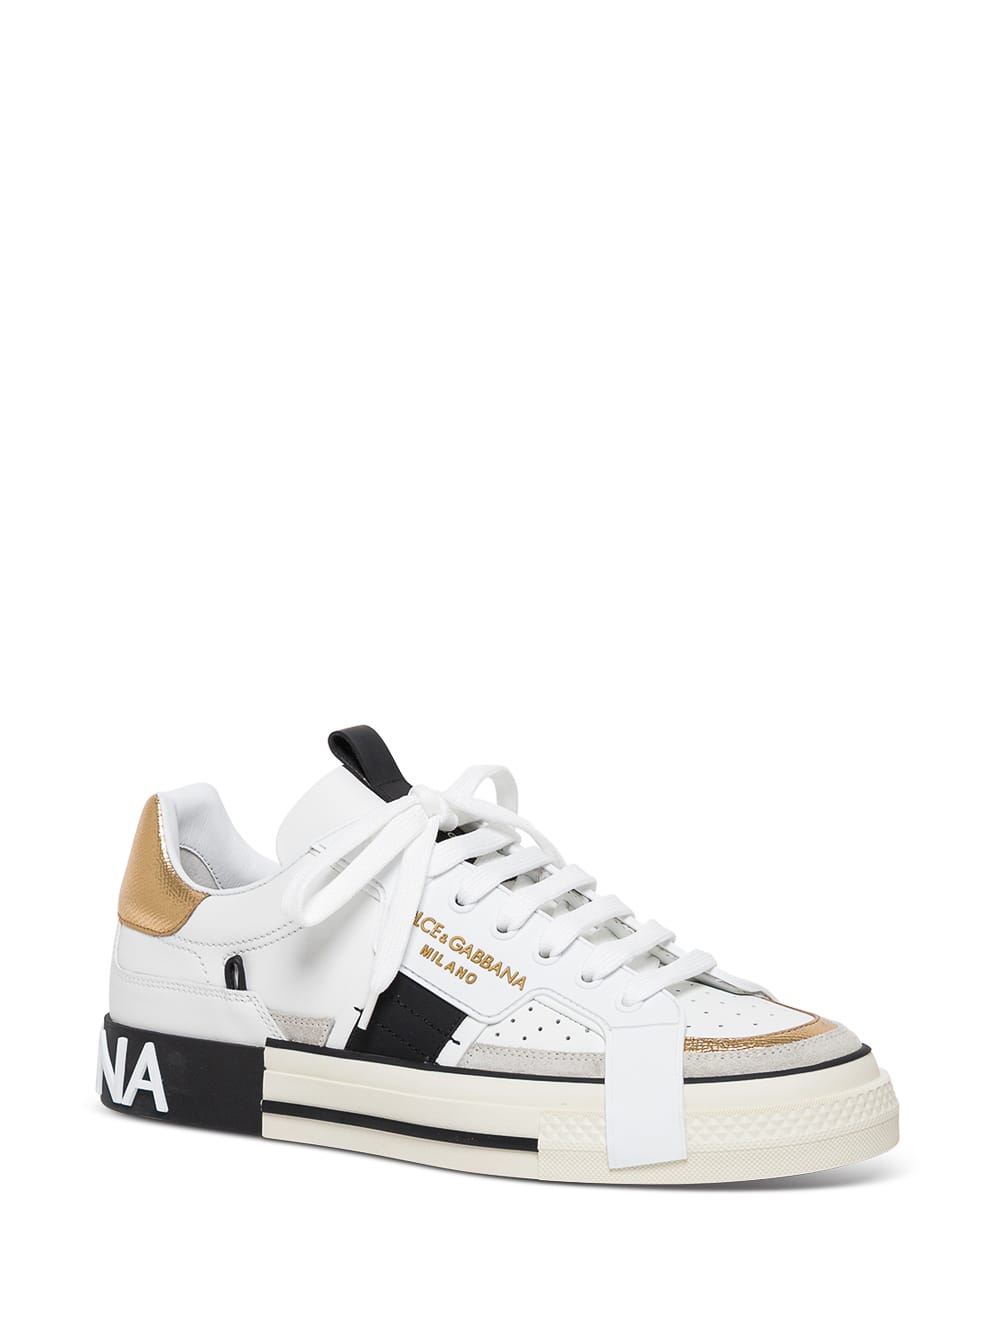 Shop Dolce & Gabbana Custom Leather Sneakers With Metallic Inserts In White